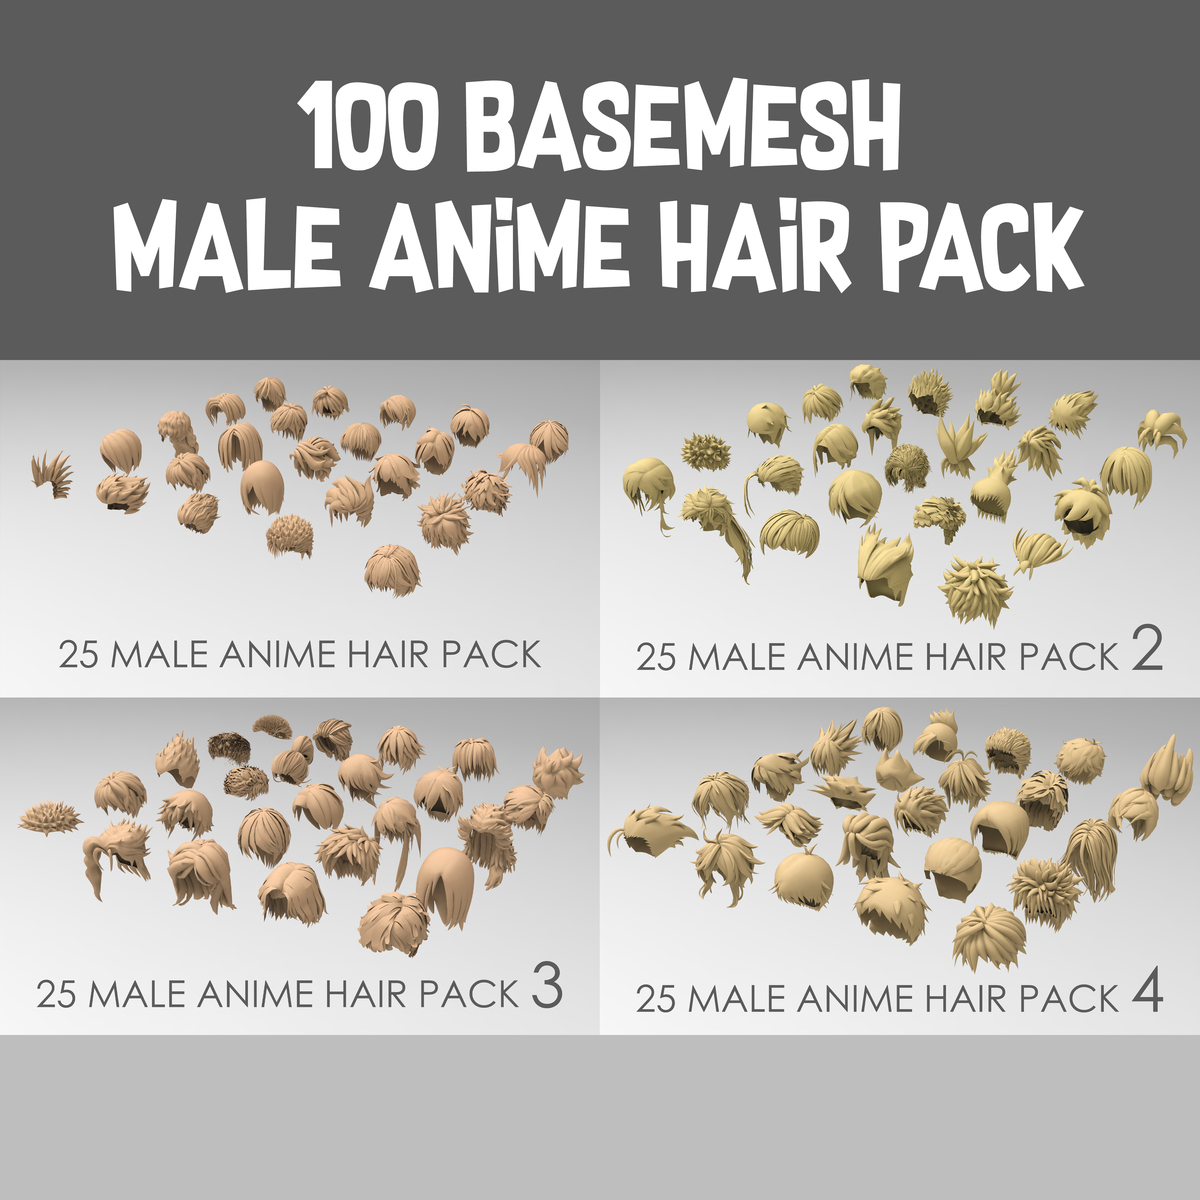 ArtStation - Anime Hairstyles Pack (9 types of hairstyles)